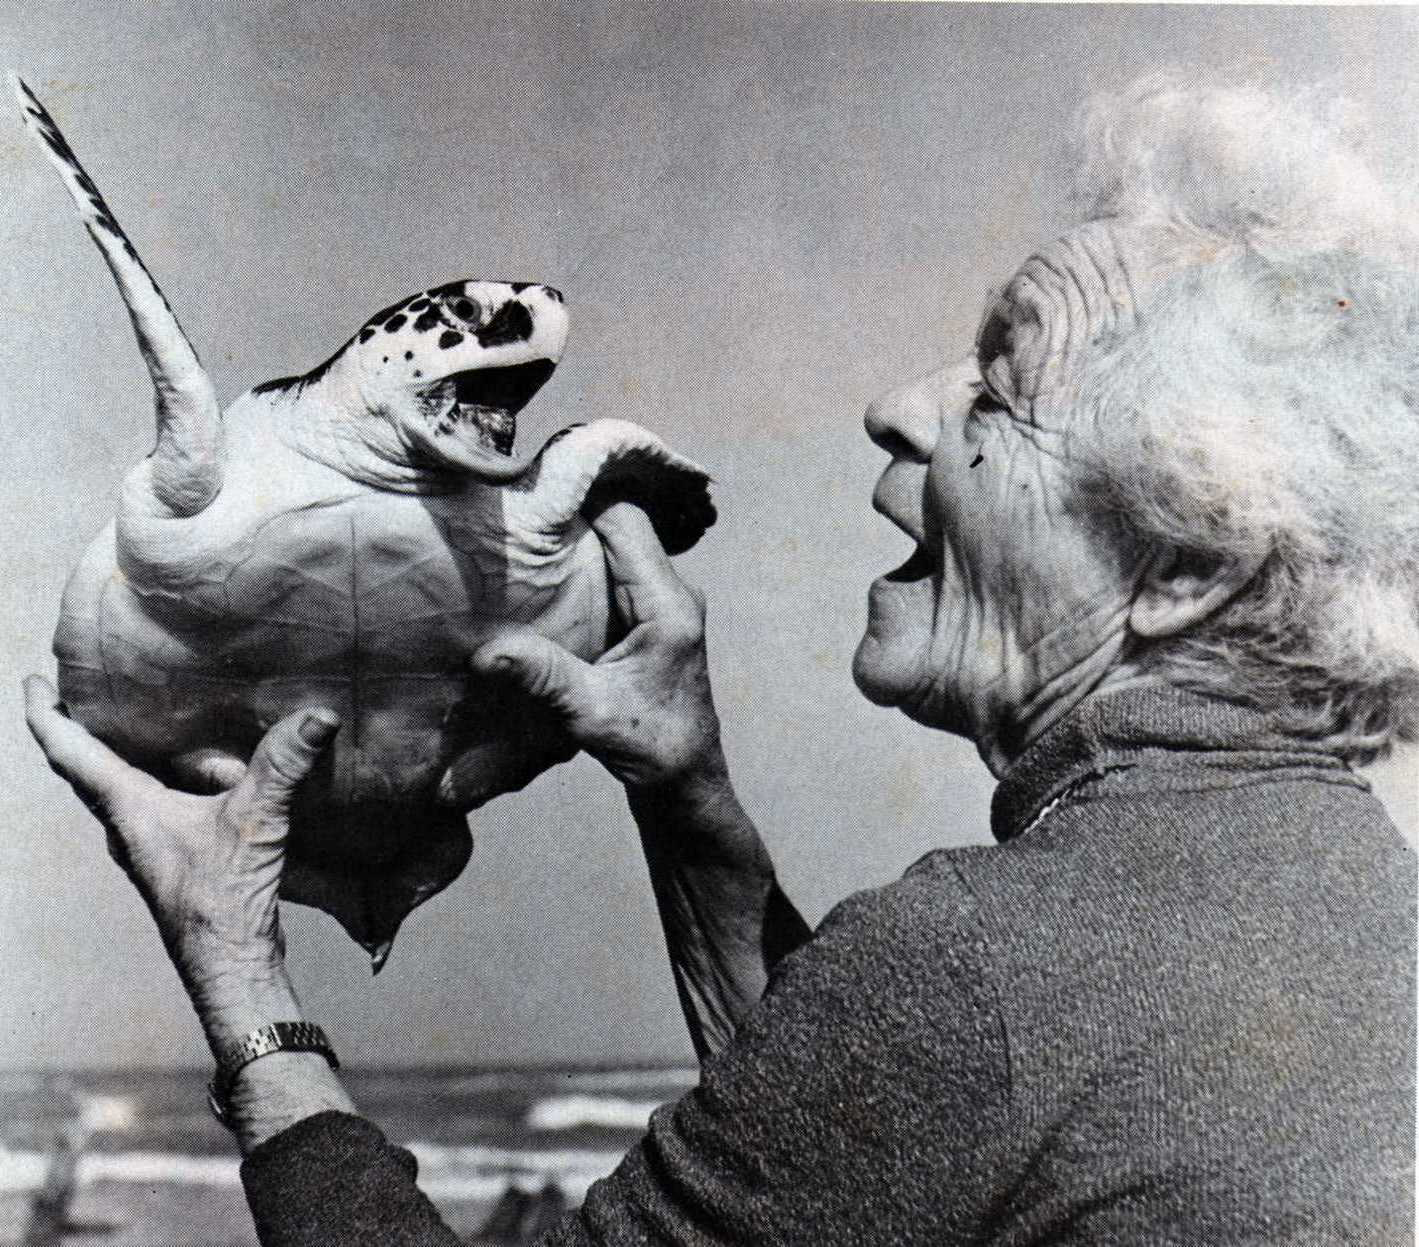 Ila Loetscher and one of her many sea turtle children